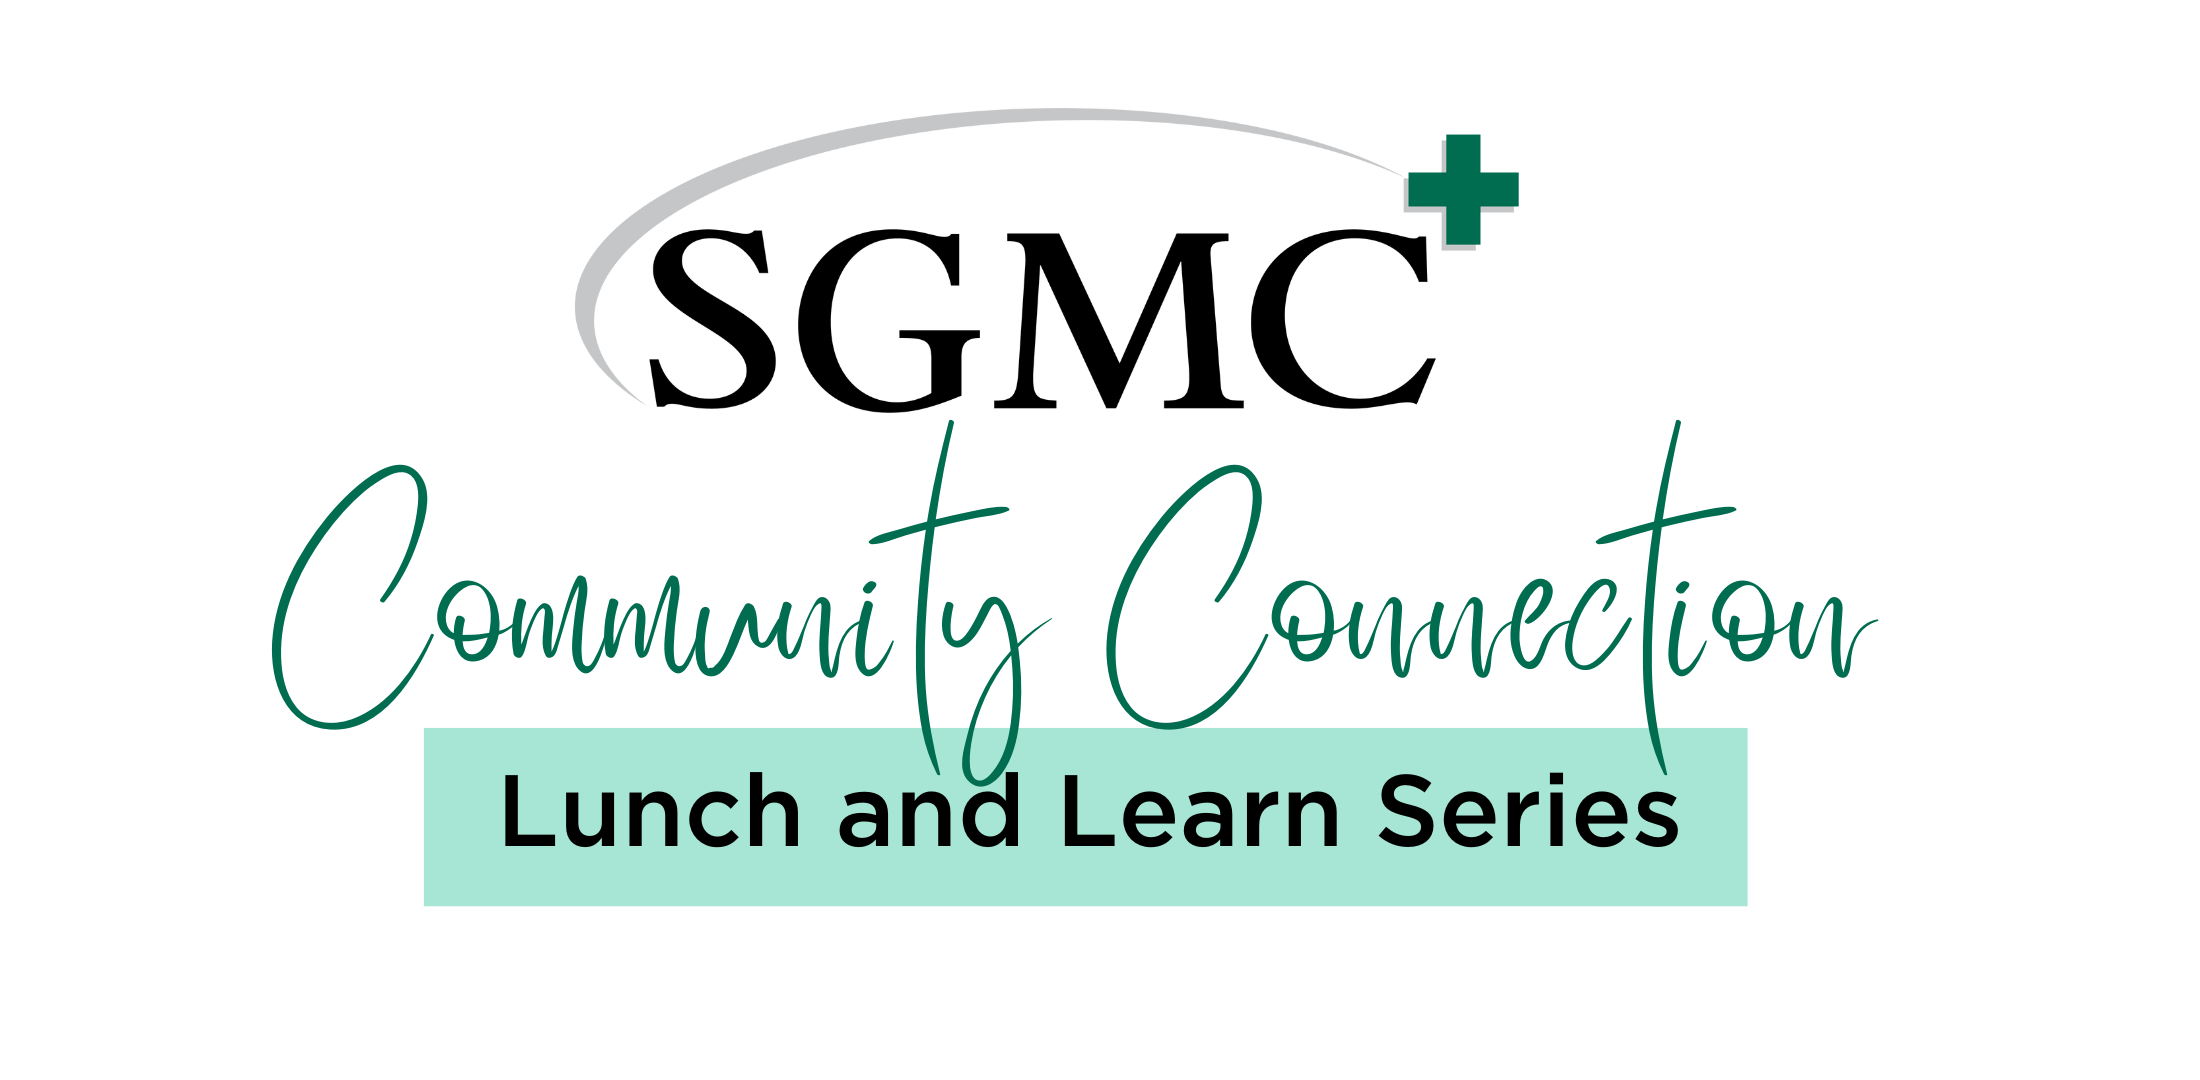 SGMC Launches Community Connection Lunch and Learn Series - sgmc.org